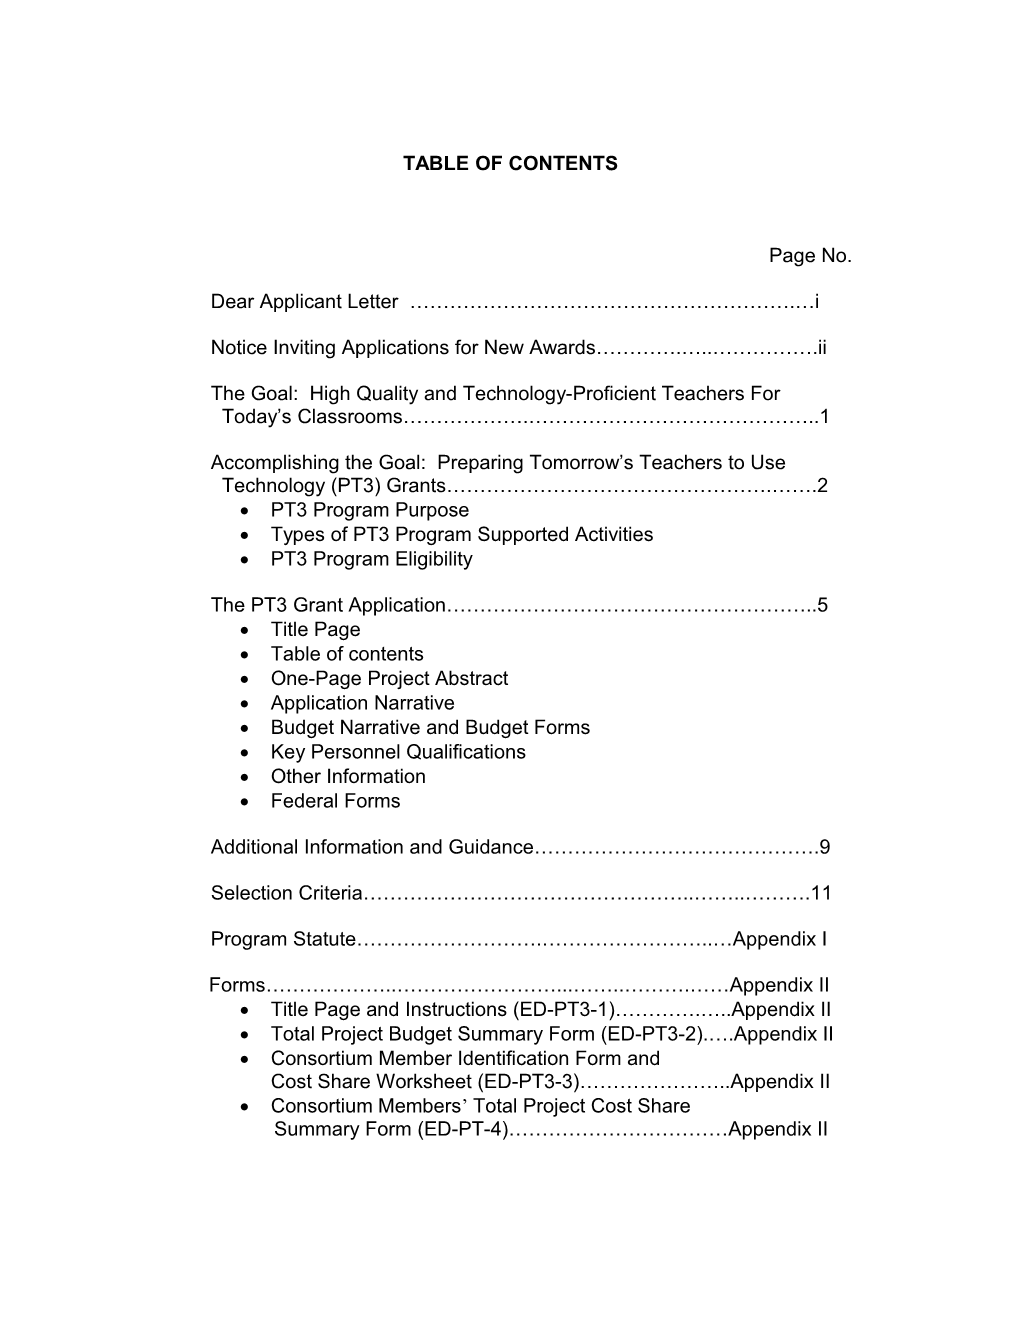 Archived: FY 2003 Application Package for the Preparing Tomorrow's Teachers to Use Technology